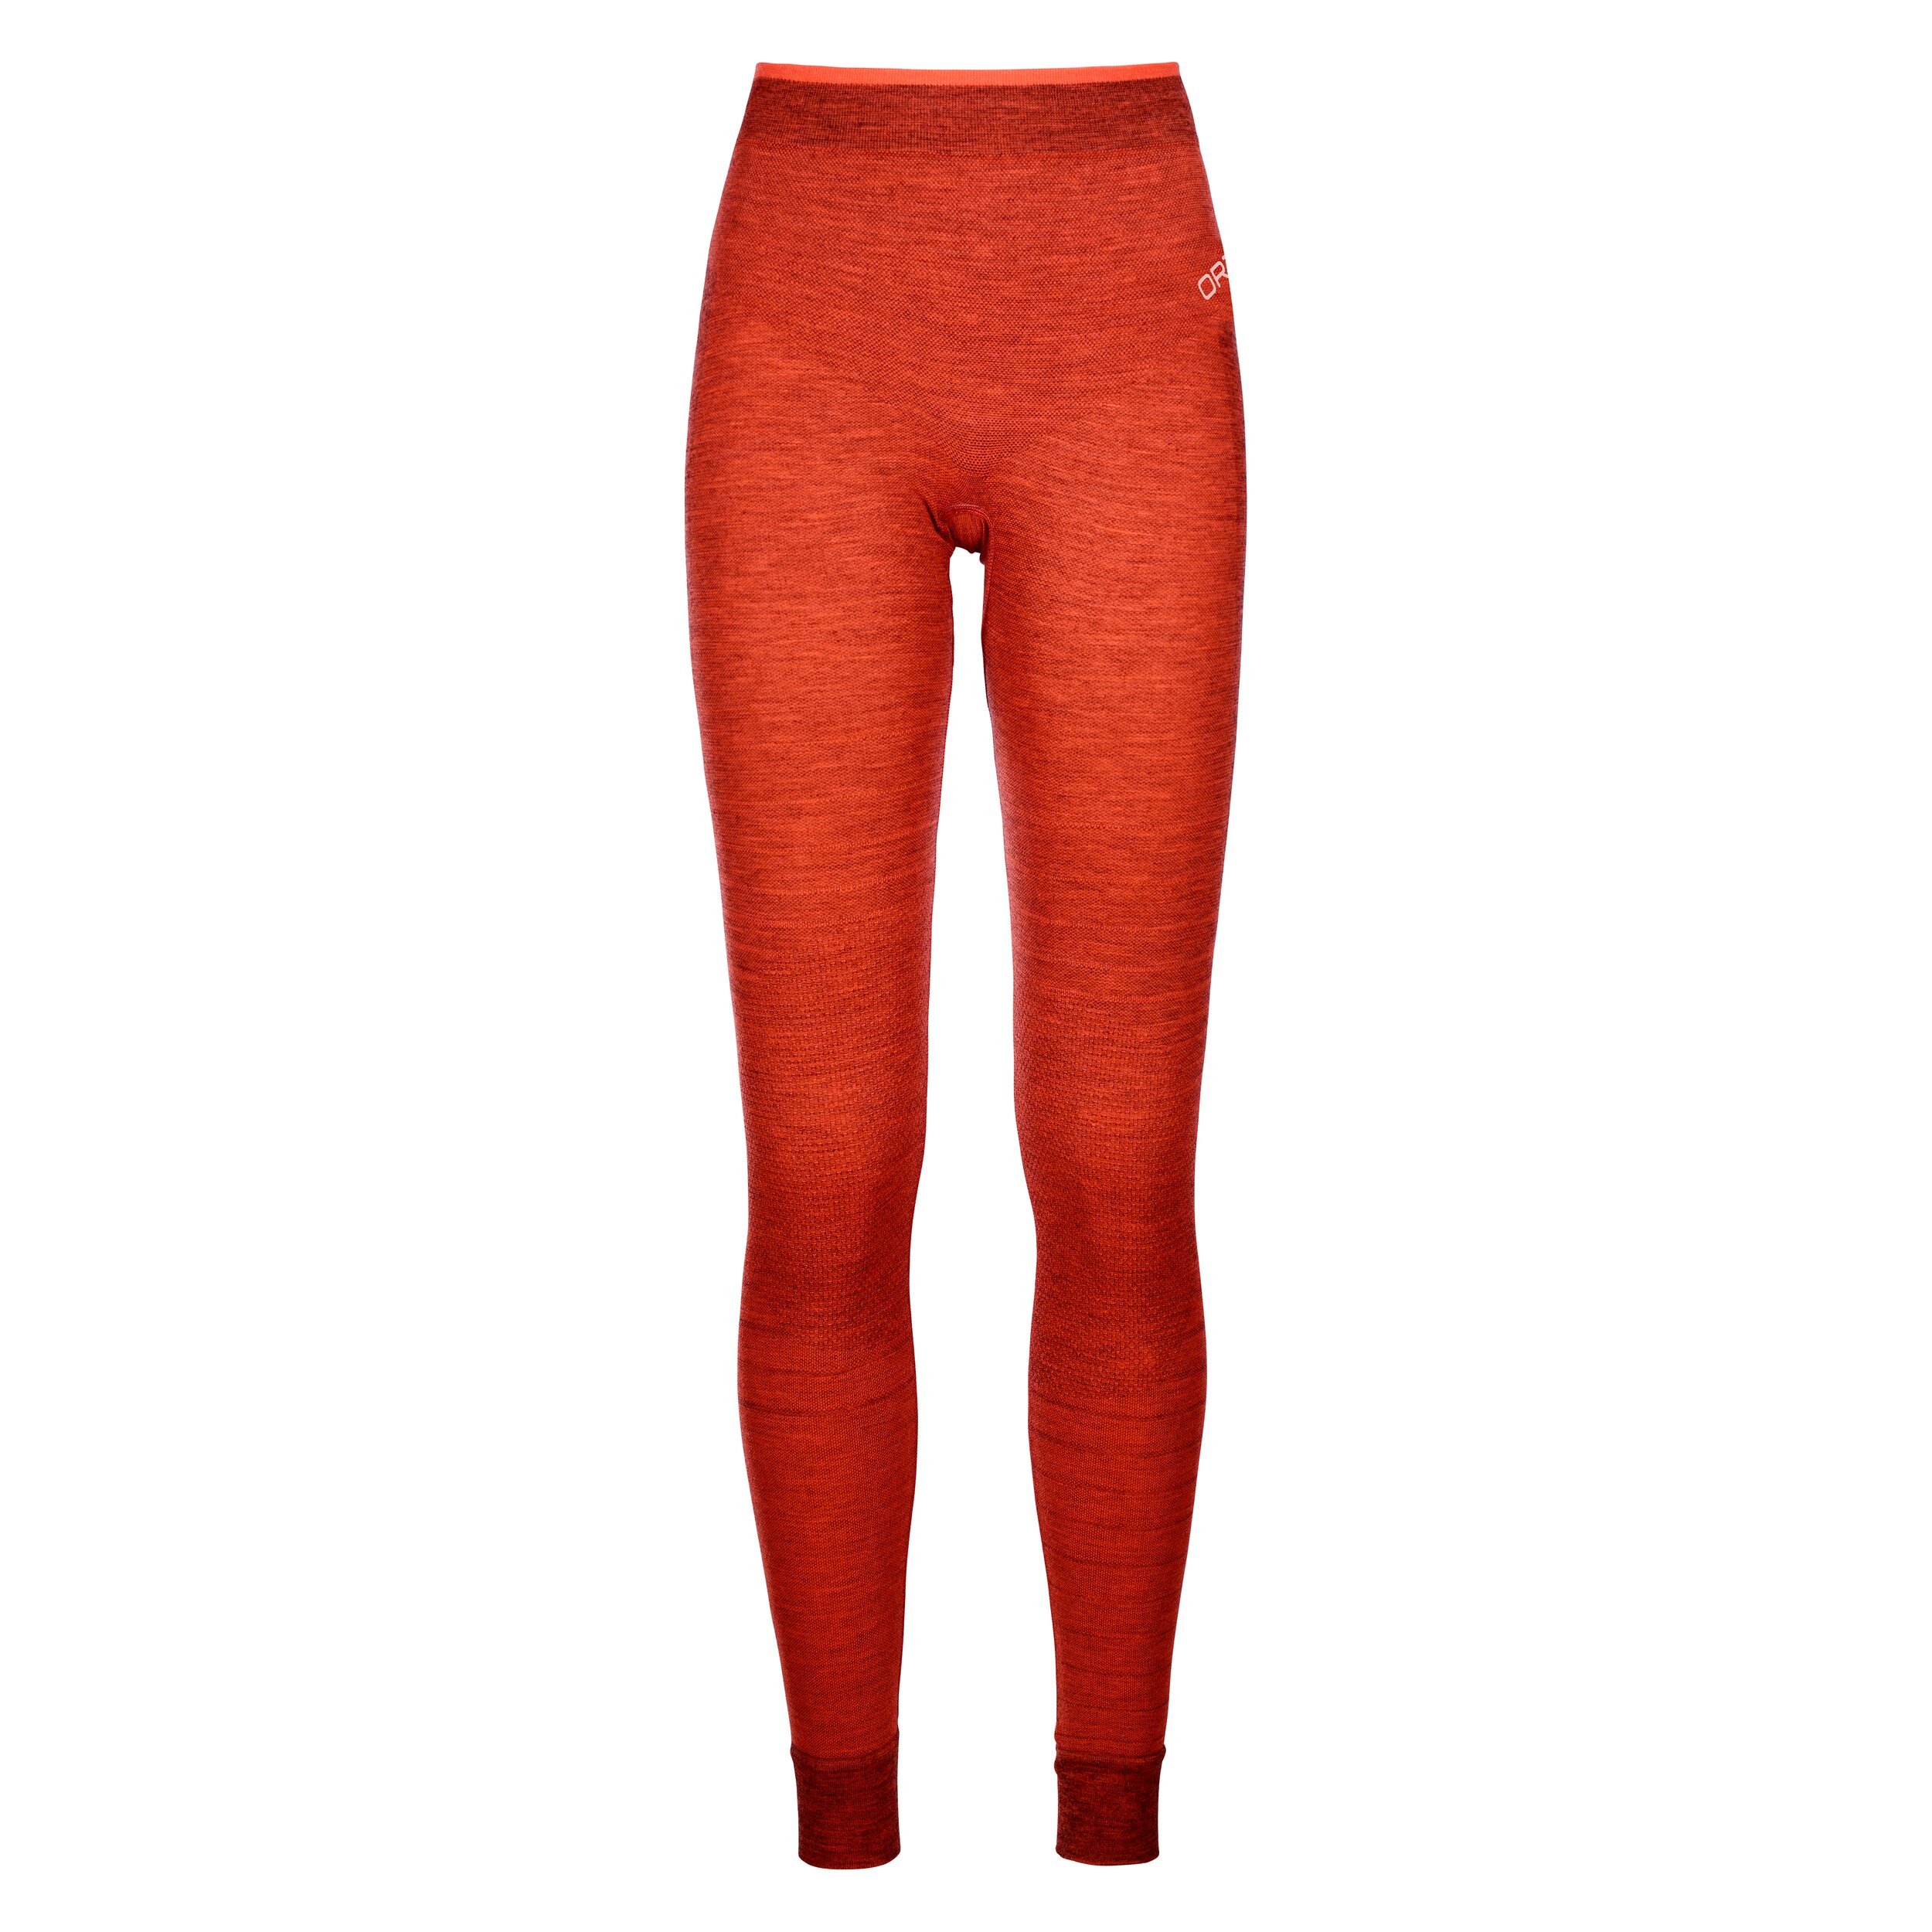 Kalesony ORTOVOX damskie 230 Competition 85842 32201 230_COMPETITION_LONG_PANTS_W_coral B 01 miniaturka